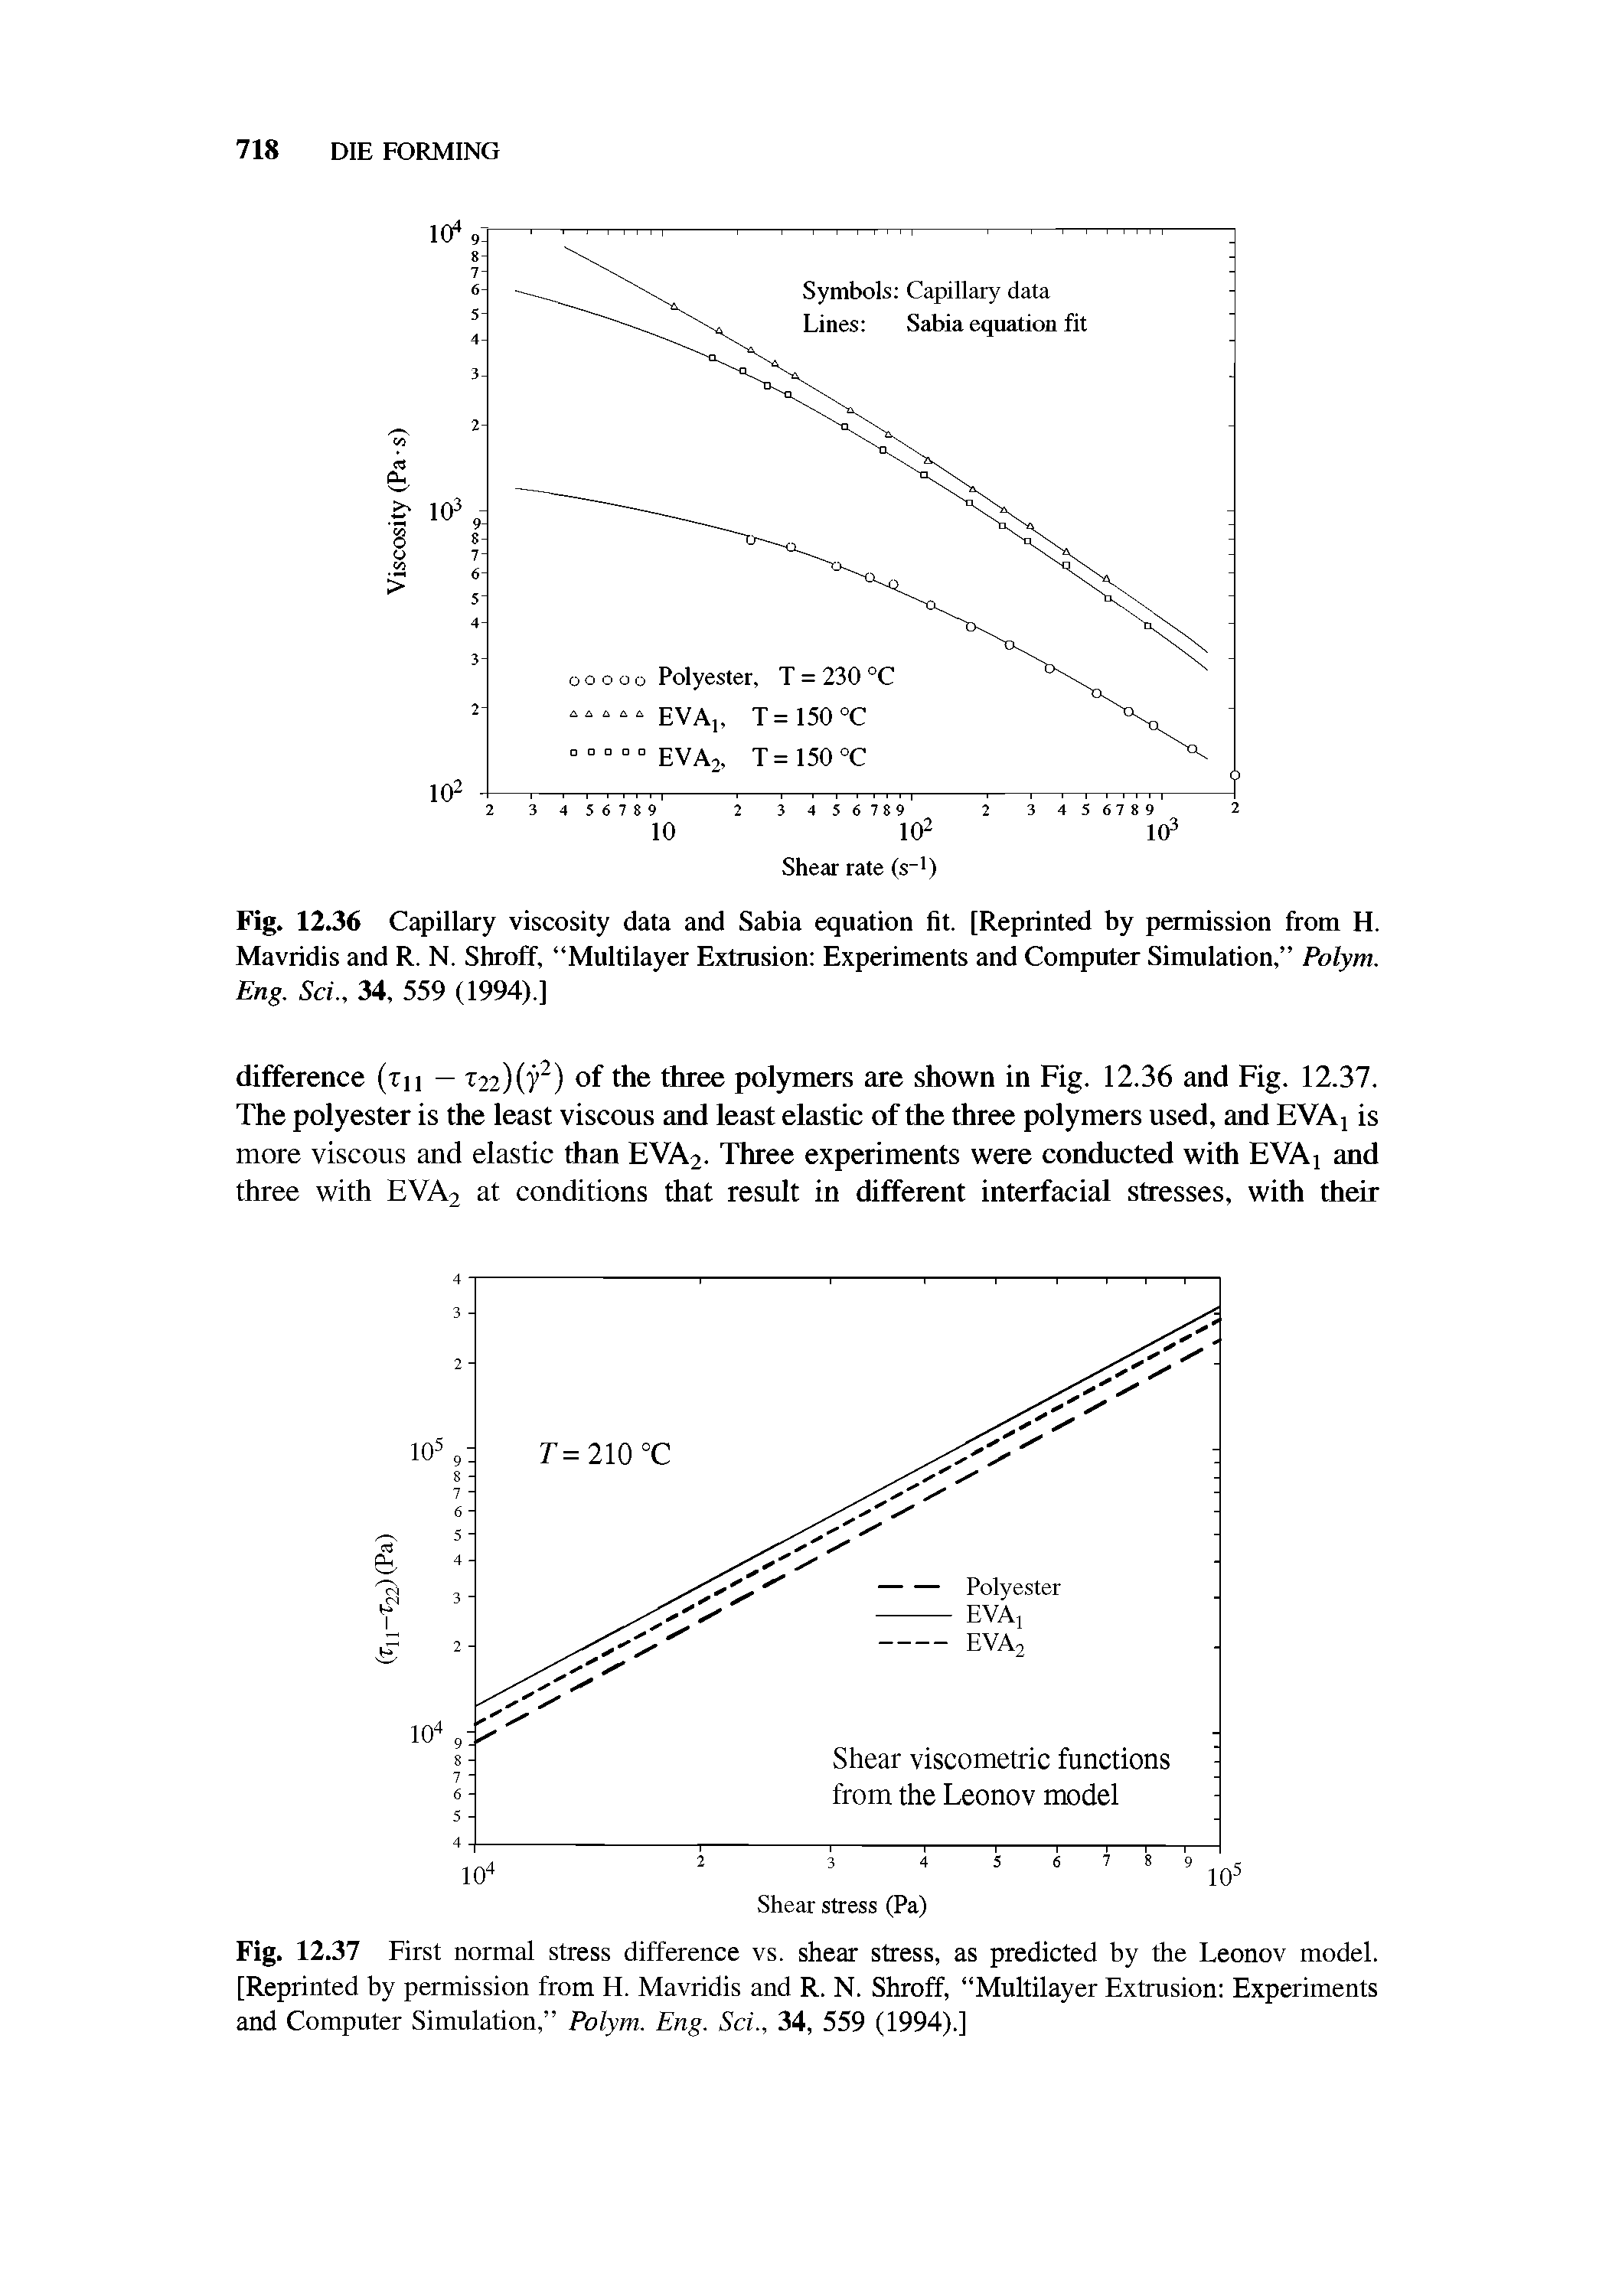 Fig. 12.36 Capillary viscosity data and Sabia equation fit. [Reprinted by permission from H. Mavridis and R. N. Shroff, Multilayer Extrusion Experiments and Computer Simulation, Polym. Eng. Sci., 34, 559 (1994).]...